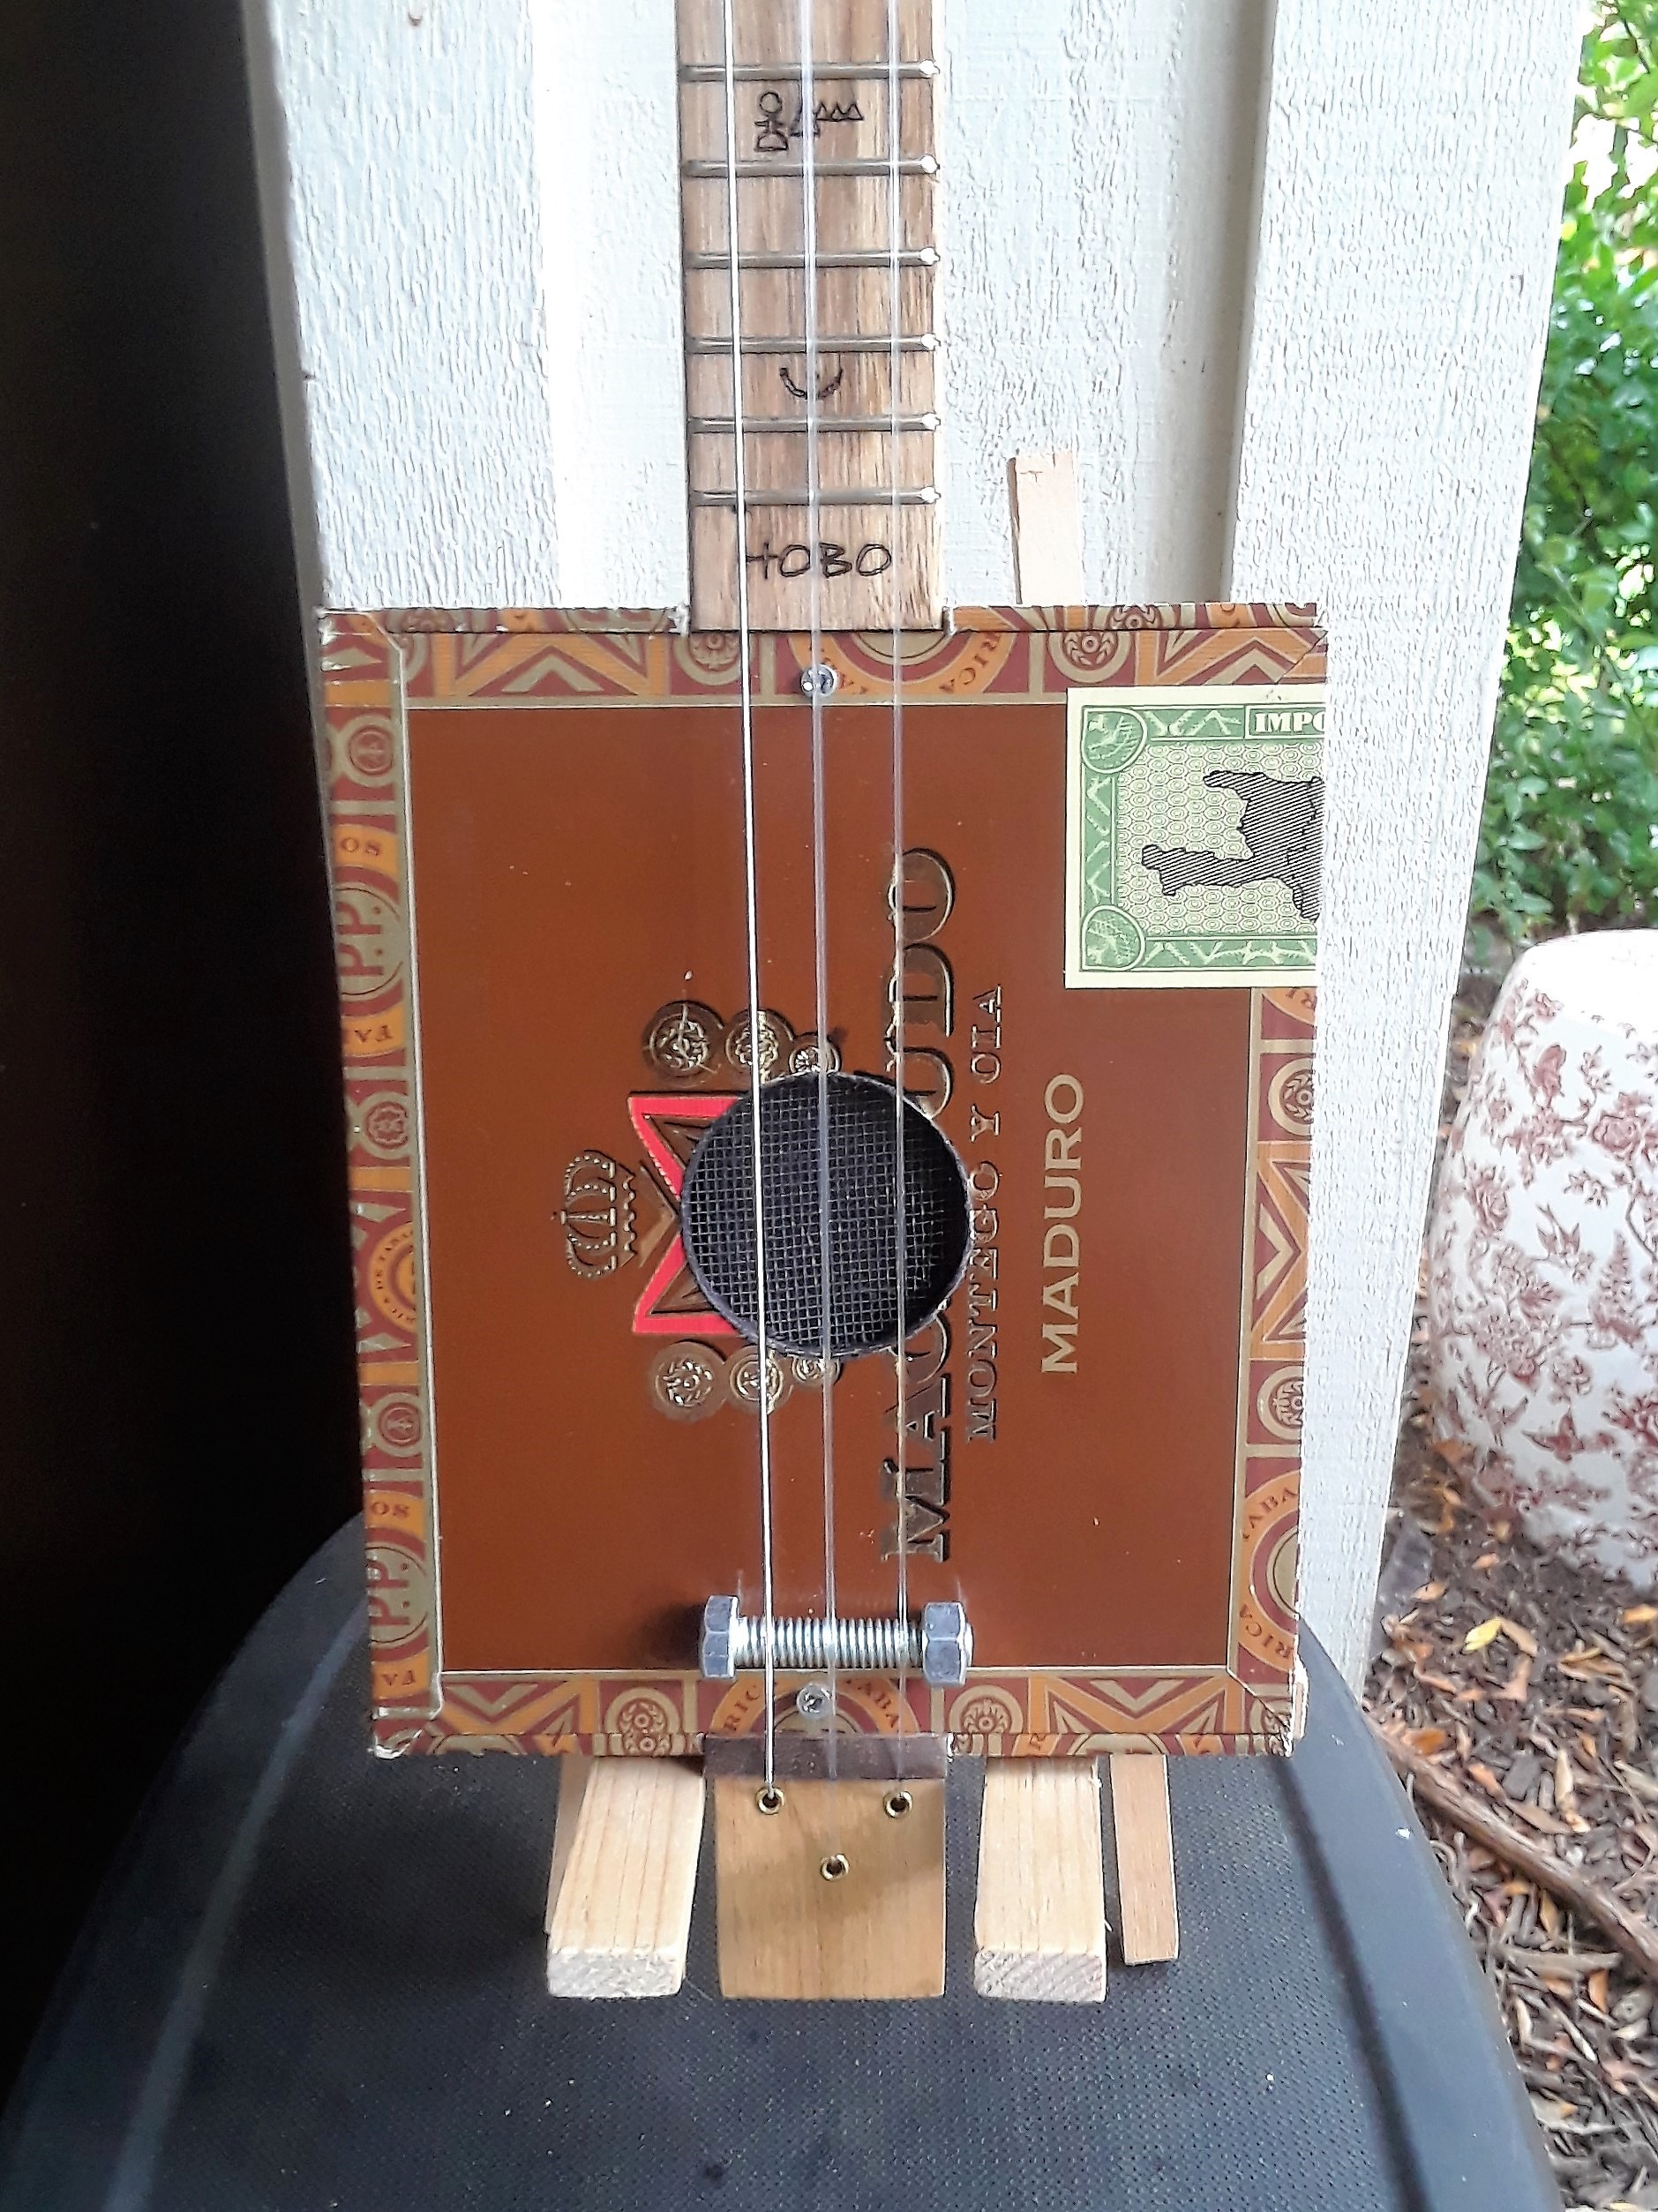 Hobo Fiddle Strings on The Whistler Hobo Fiddle by Jimmy C. 